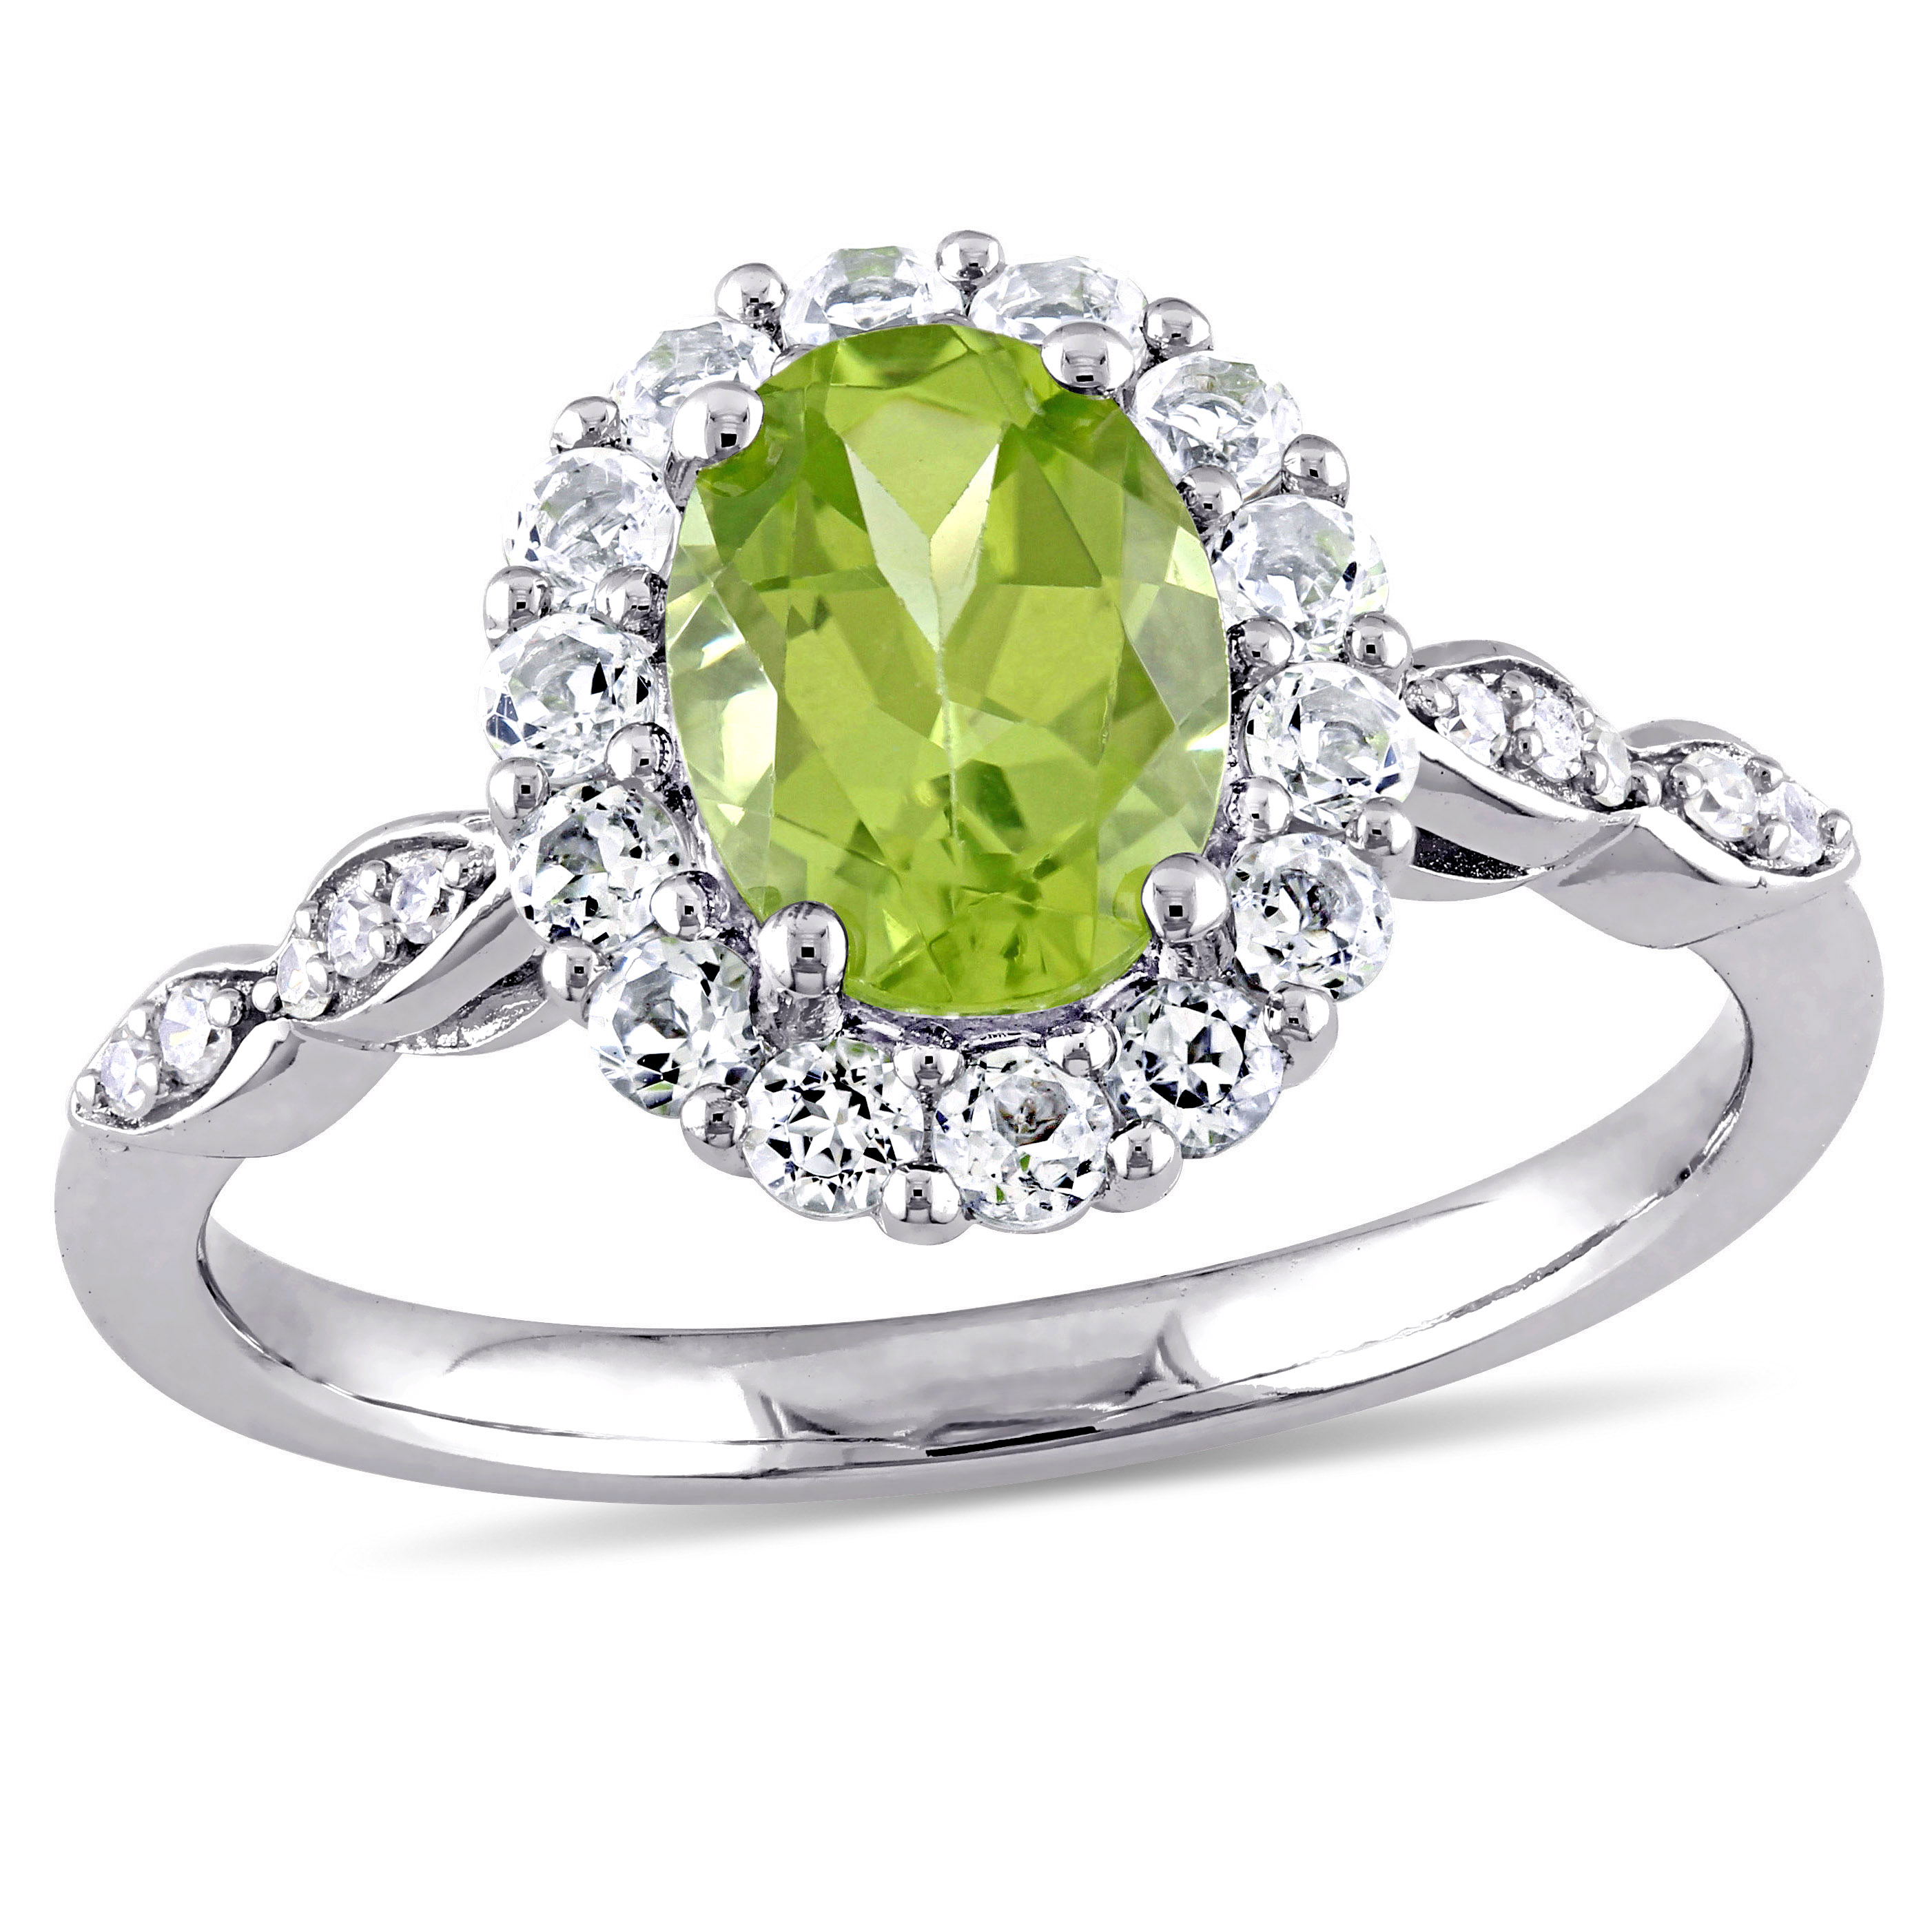 Oval Shape Peridot, White Topaz and Diamond Accent Vintage Ring in 14k White Gold